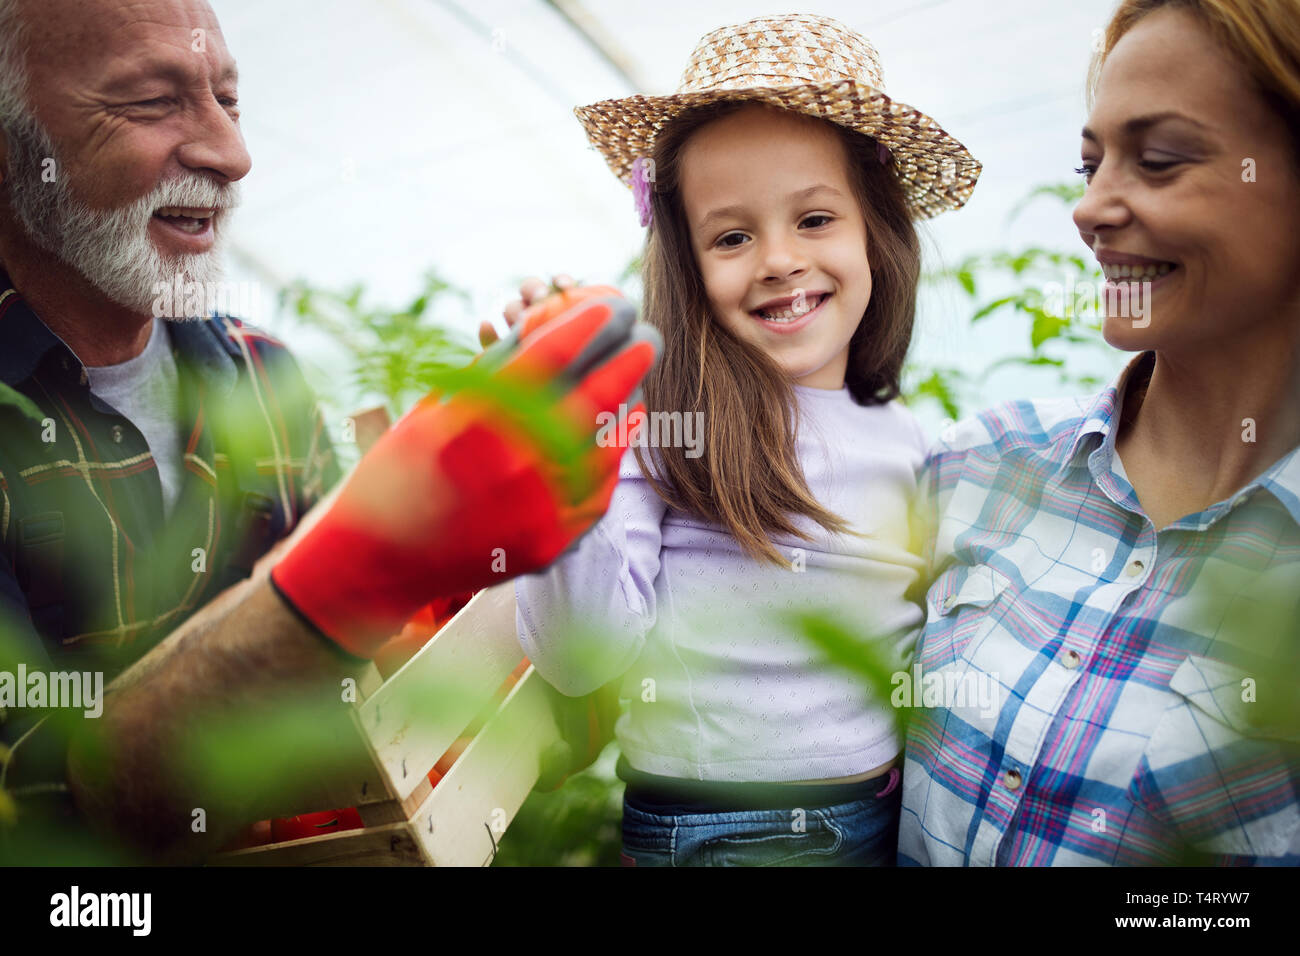 Grandfather growing organic vegetables with grandchildren and family at farm Stock Photo